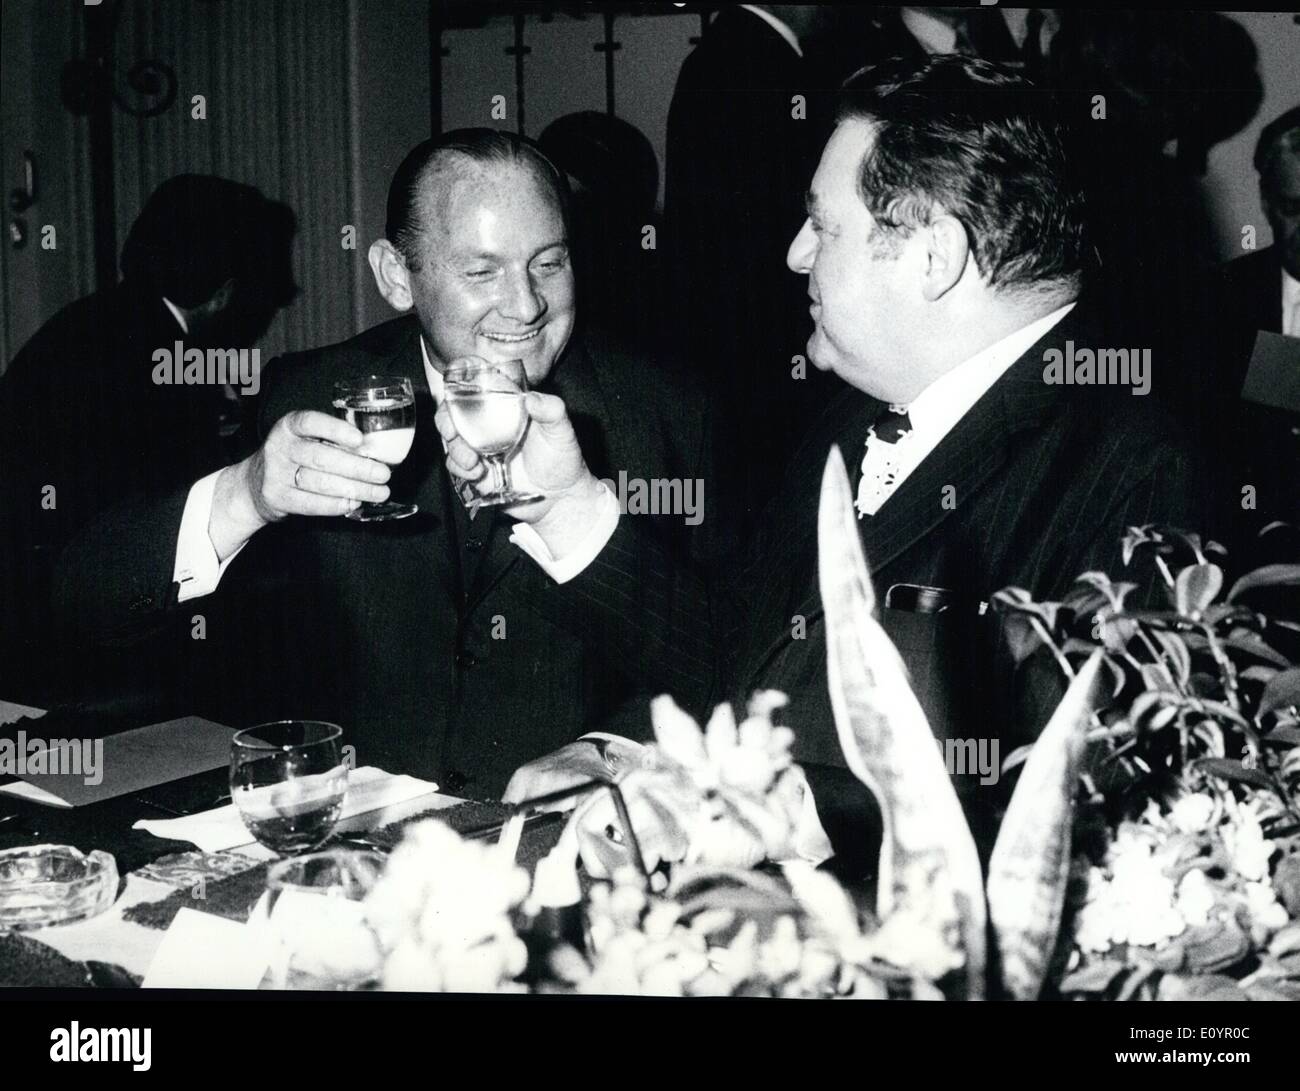 Mar. 03, 1971 - Wienerwald opens with Franz Josef Strauss. The new hotel of the international restaurant chain. Wienerwald in Feusisberg, Switzerland, has been opened with a great gala dinner. Guest of honor was the former West German minister of defense, Herr Franz Josef Strauss, right, seen here in company with the promoter of the Wienerwald empire, Herr Friedrich Jahn. Keystone Zurich 3-25-1971. Stock Photo